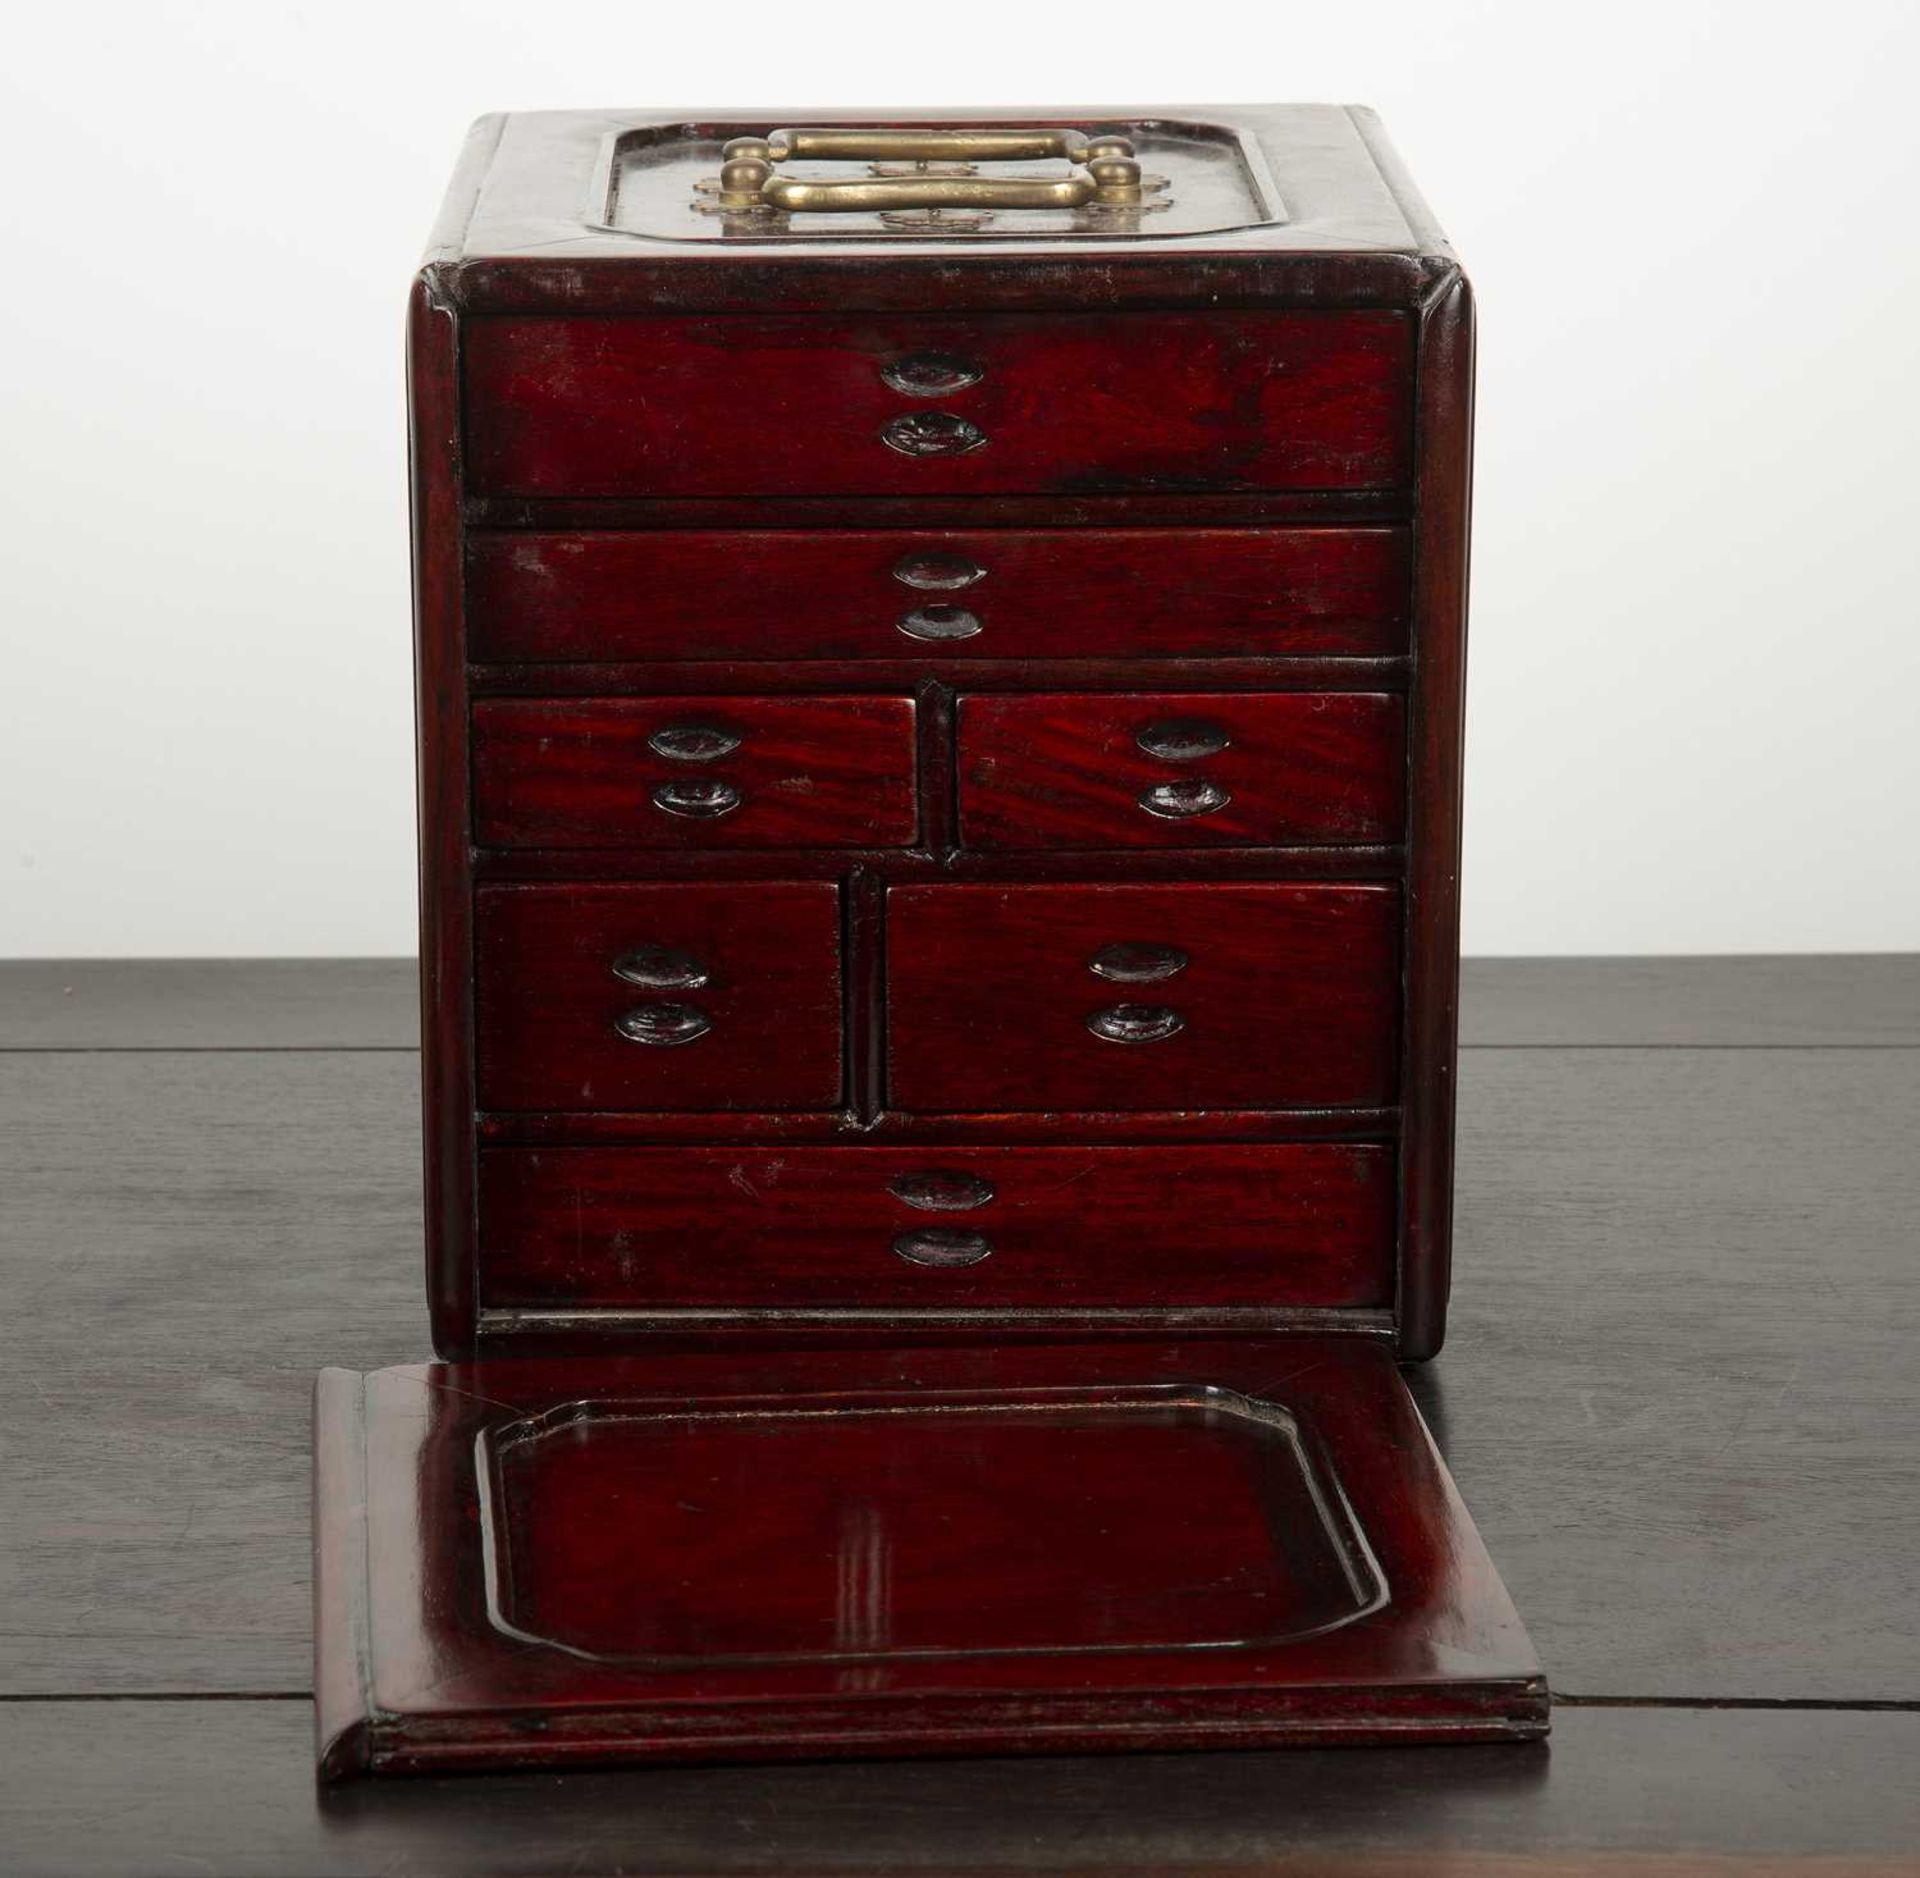 Hardwood table top cabinet Chinese fitted with small drawers enclosed by a sliding front, 20cm